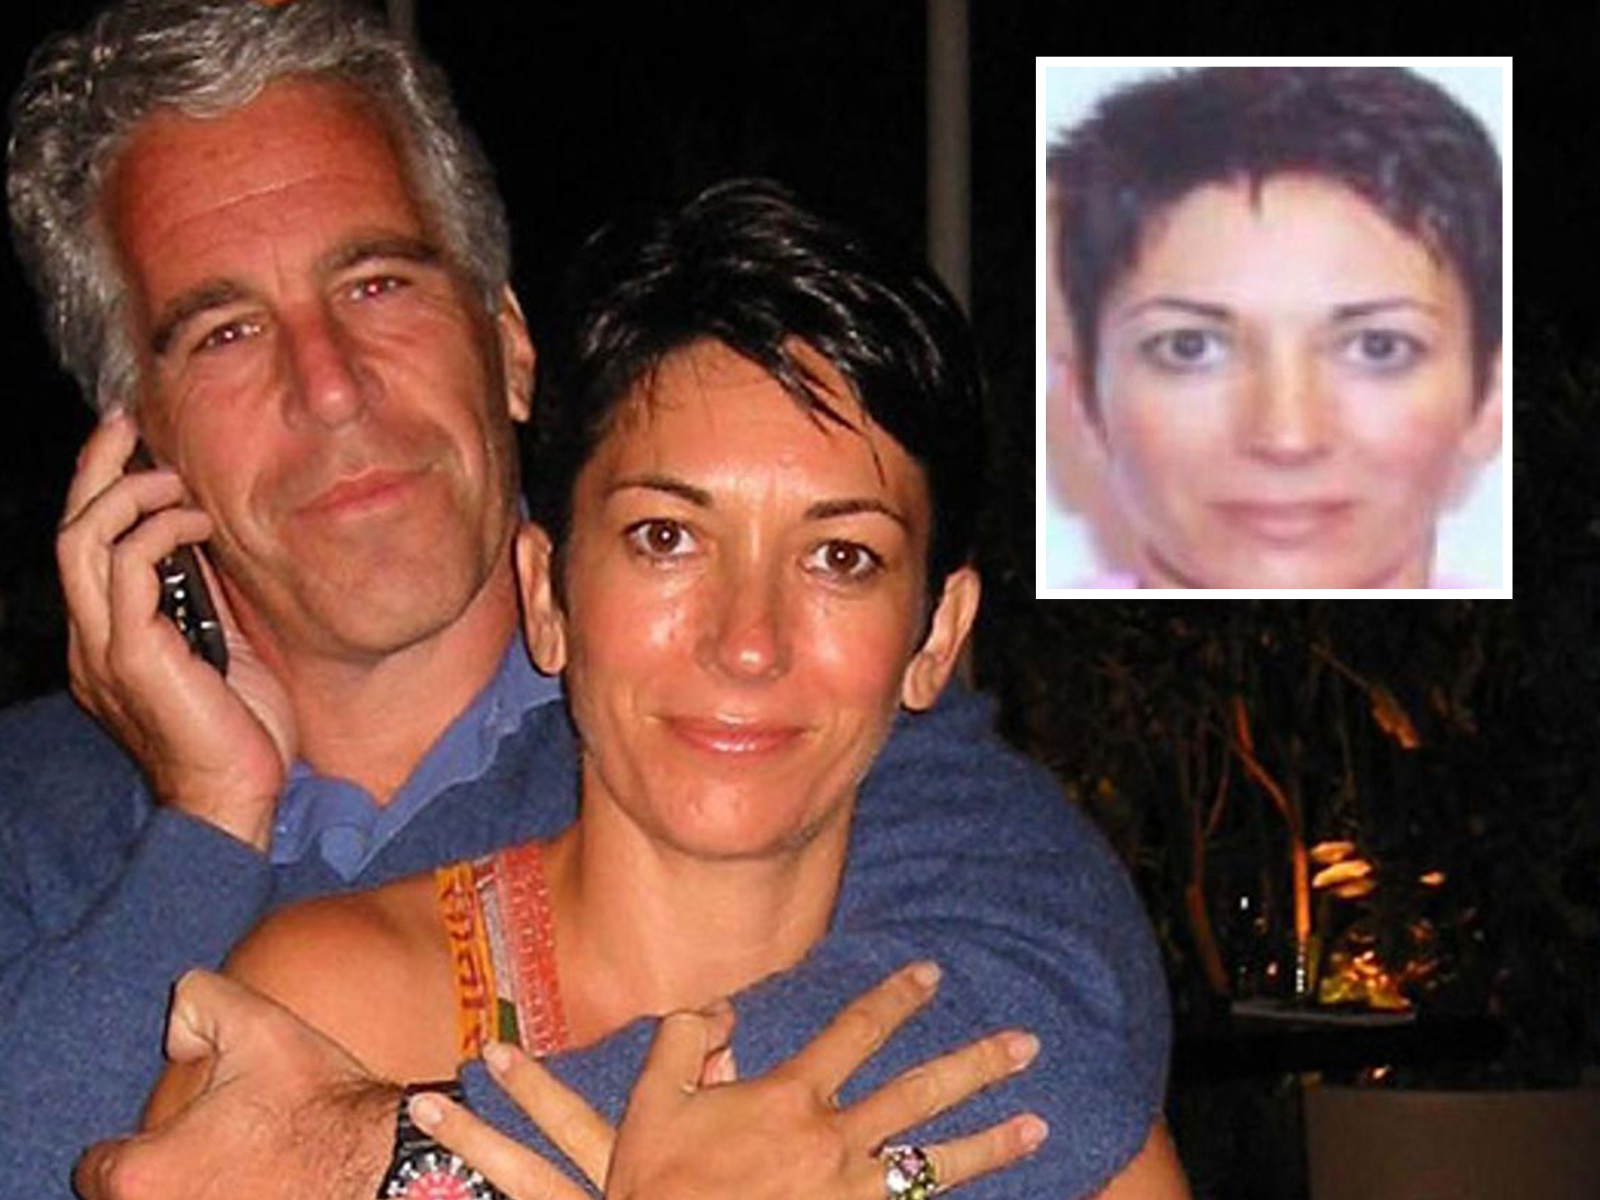 Ghislaine Maxwell Given 20 Years in Sex Trafficking Case